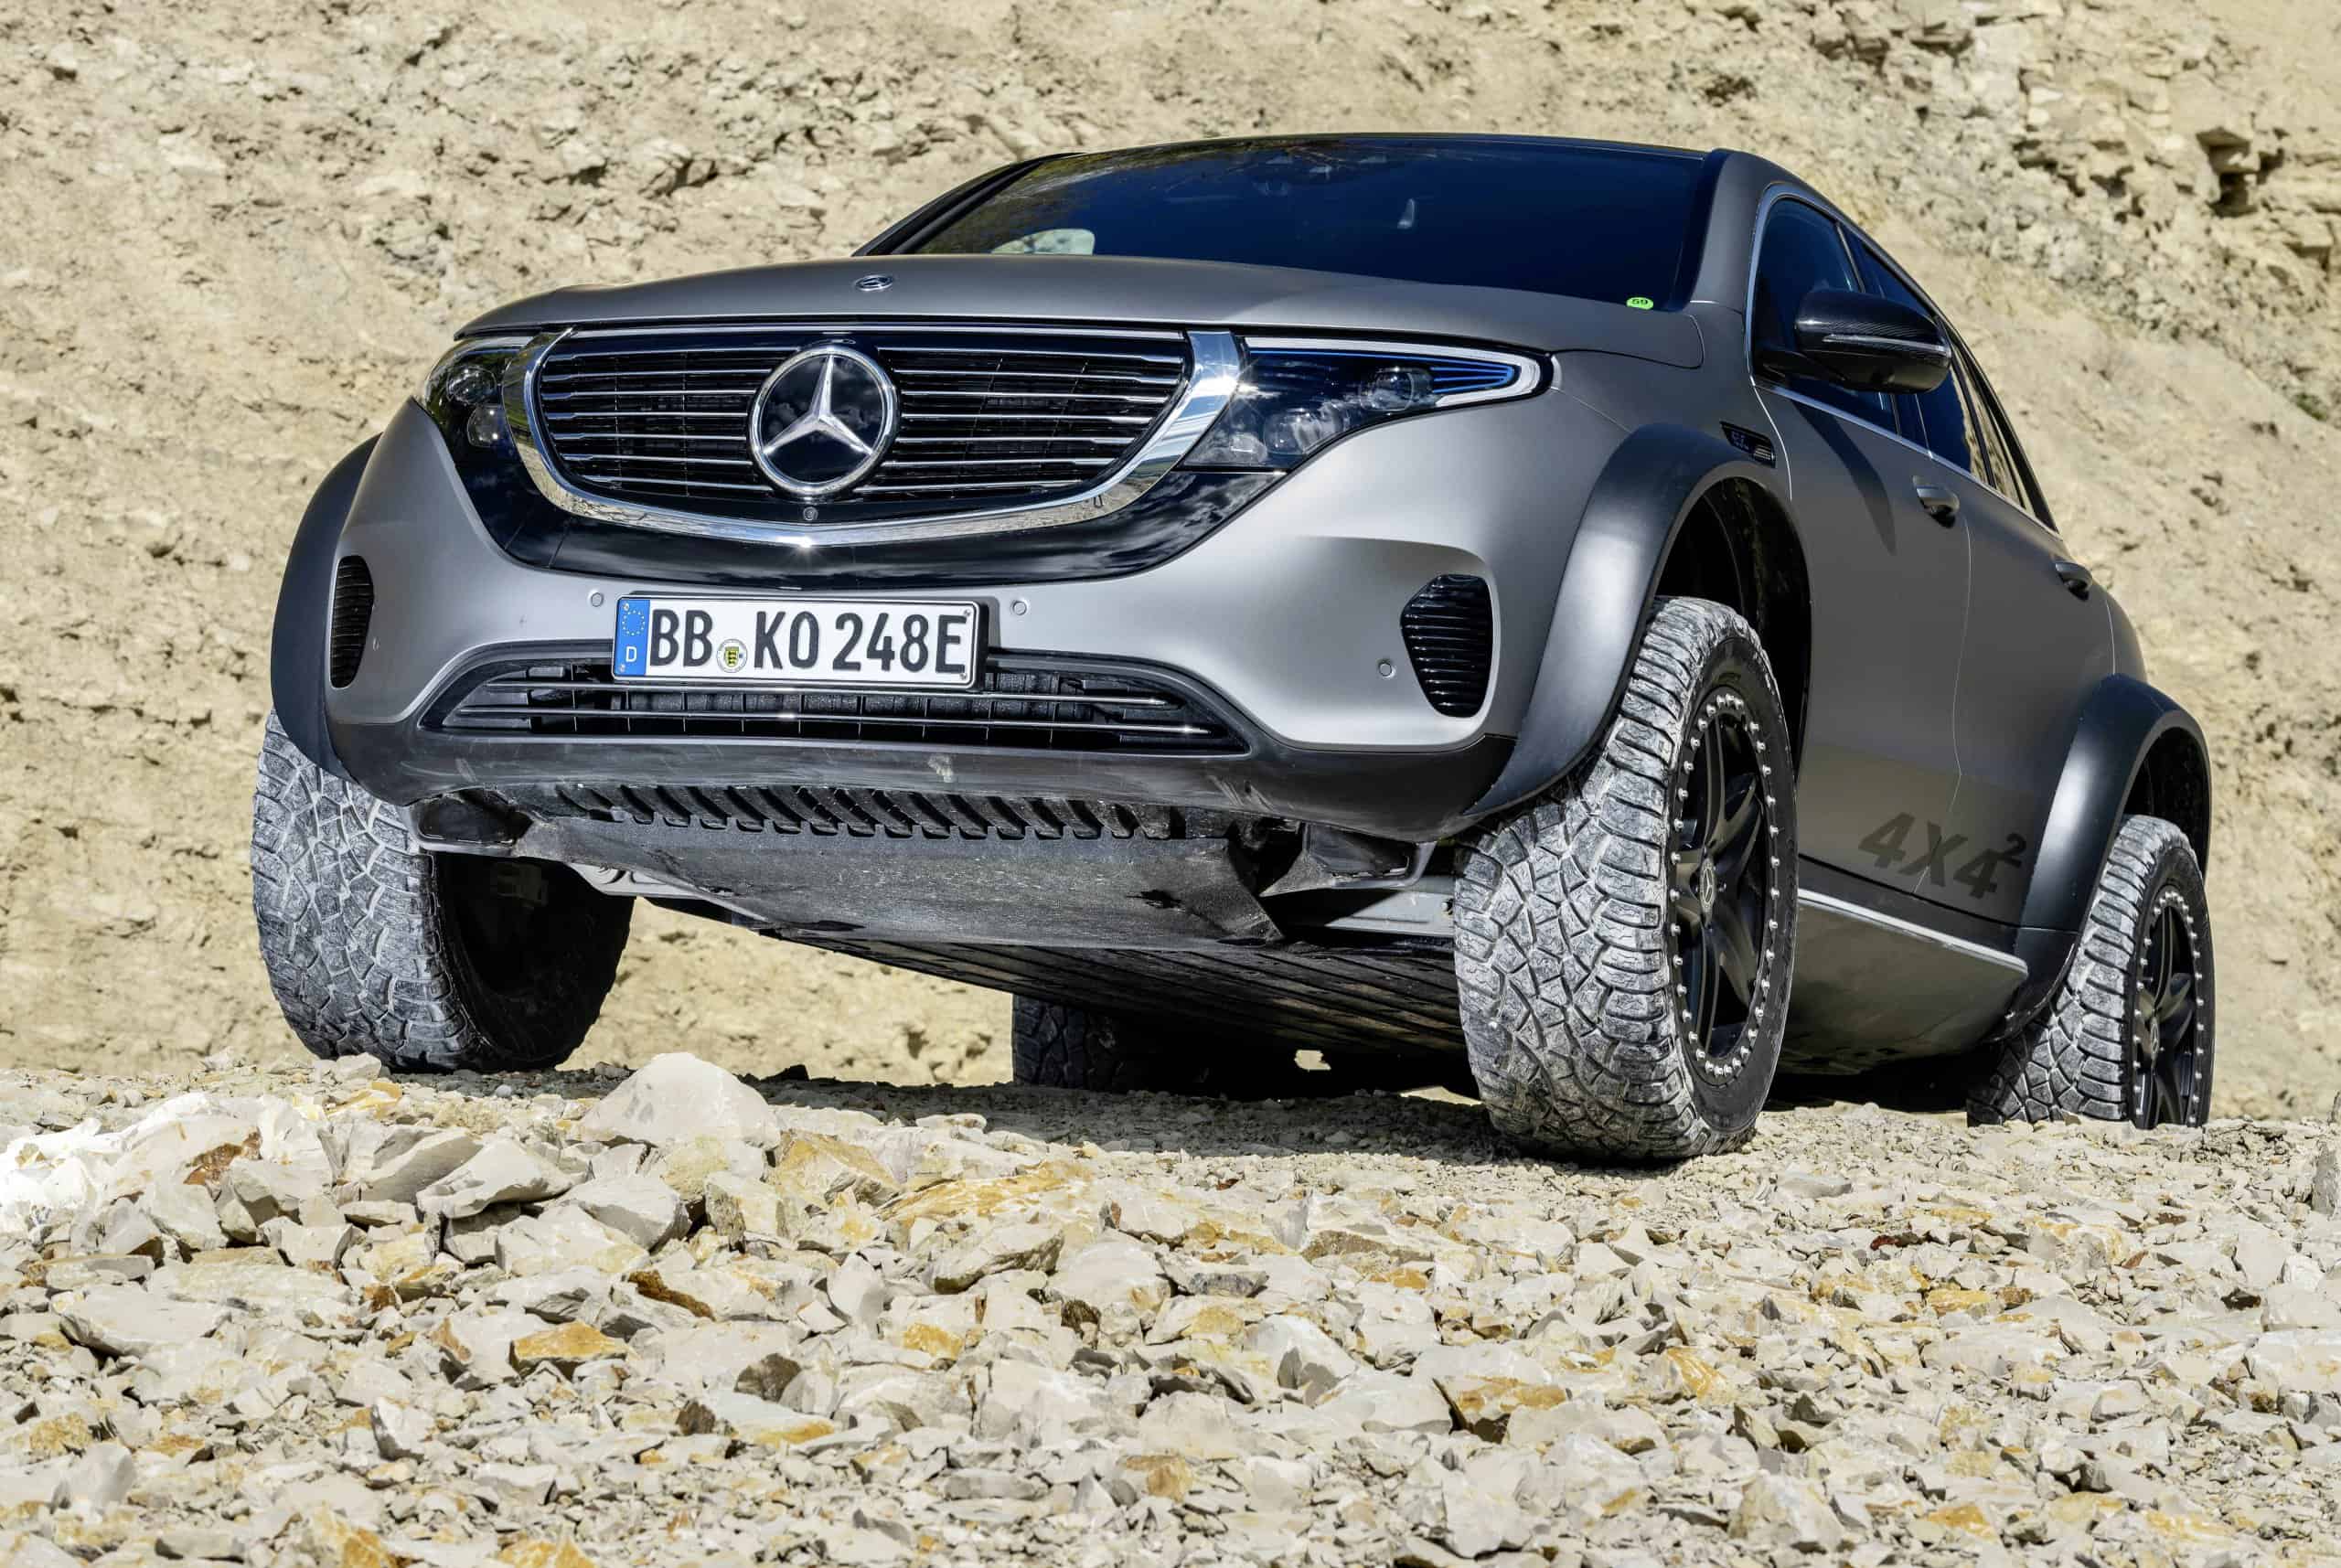 Mercedes unveils electricpowered offroad concept